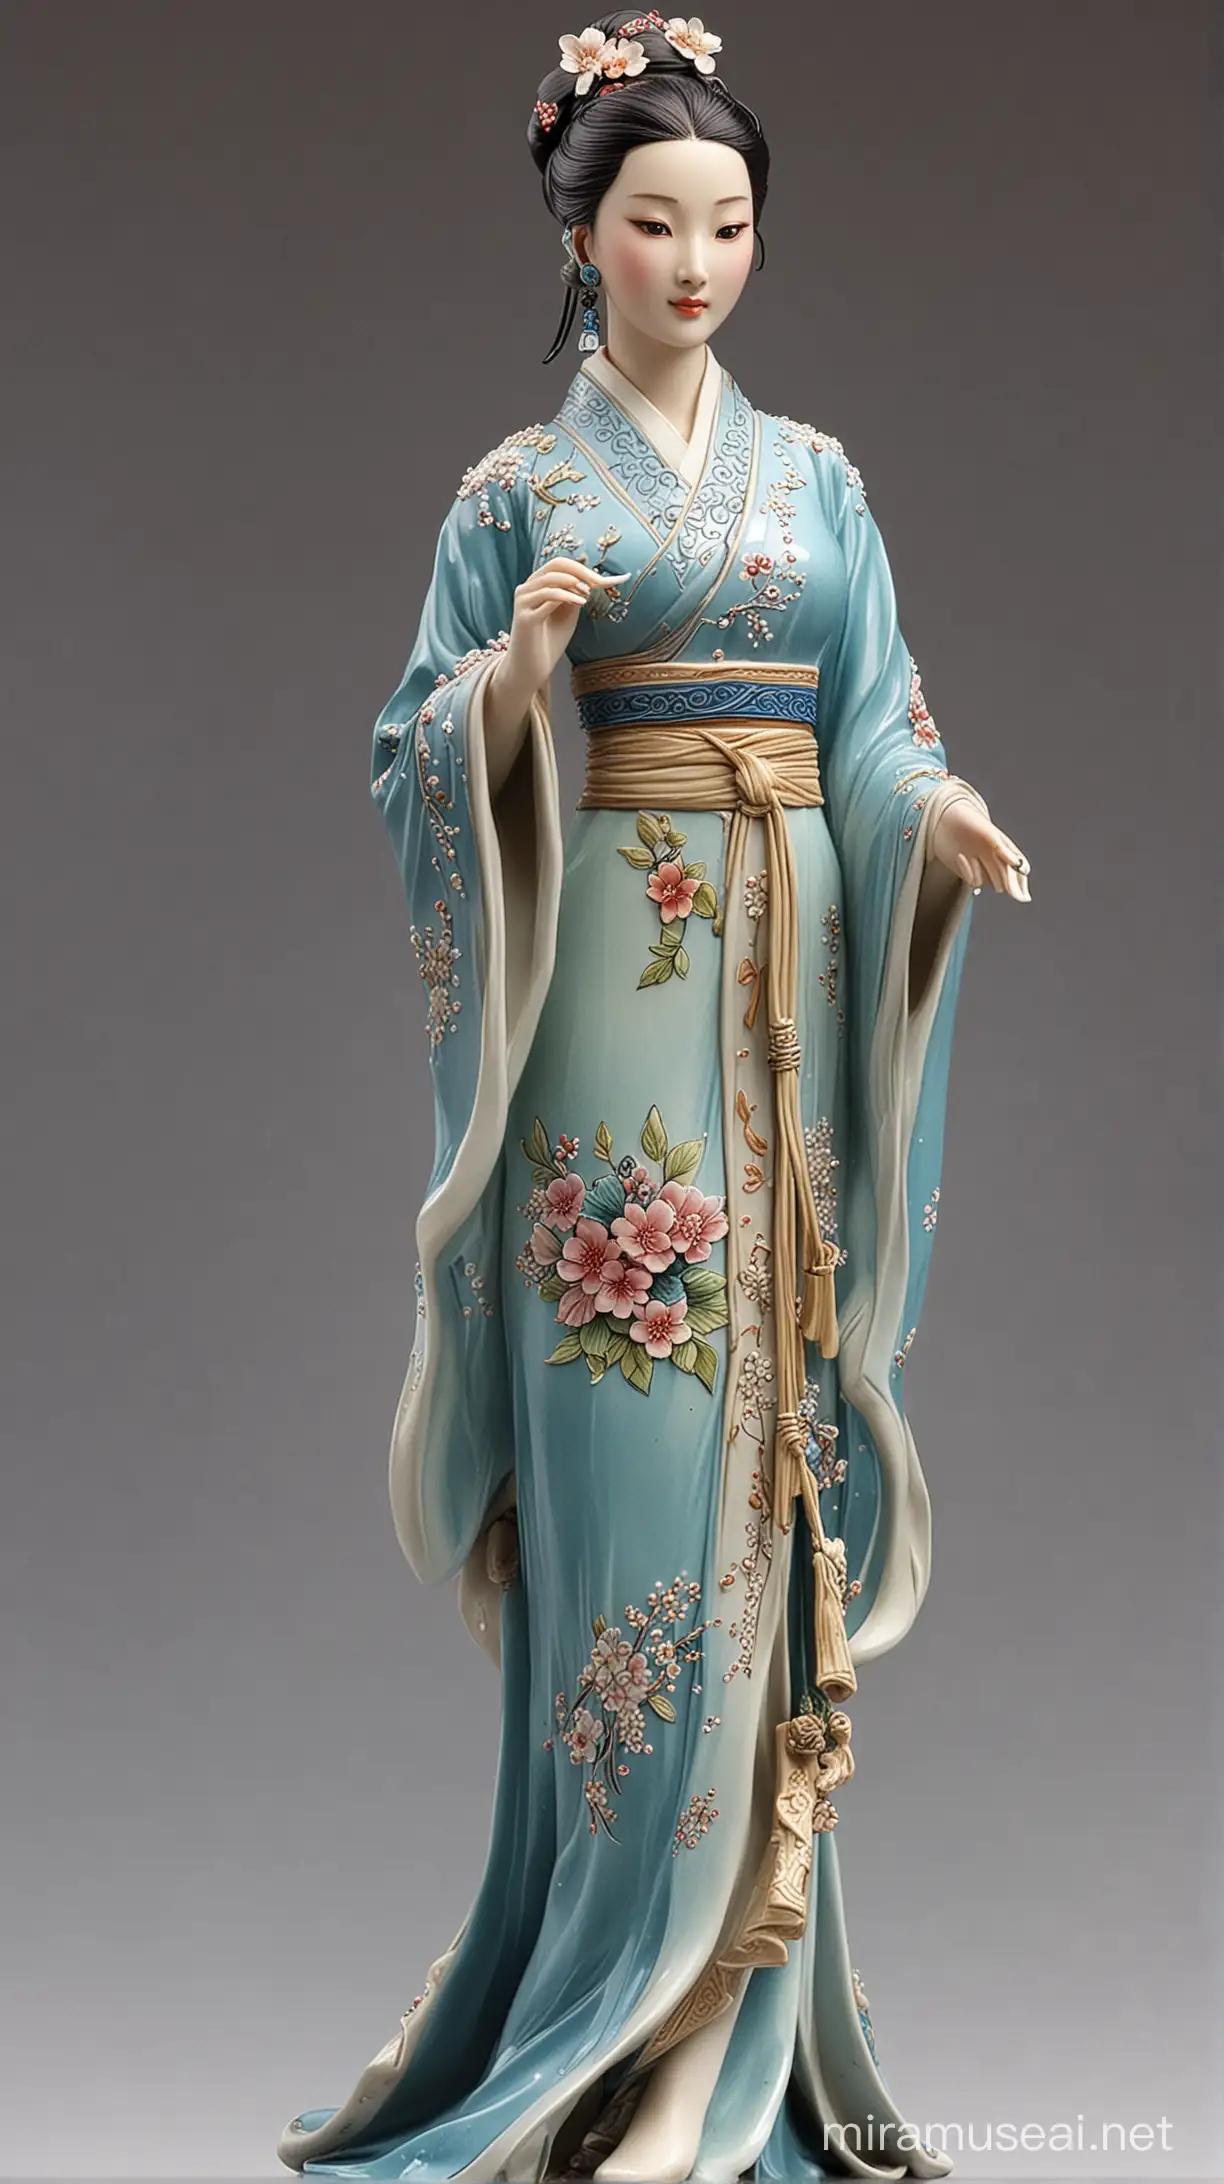 Elegant Chinese Ceramic Beauty Statue in Traditional Dress